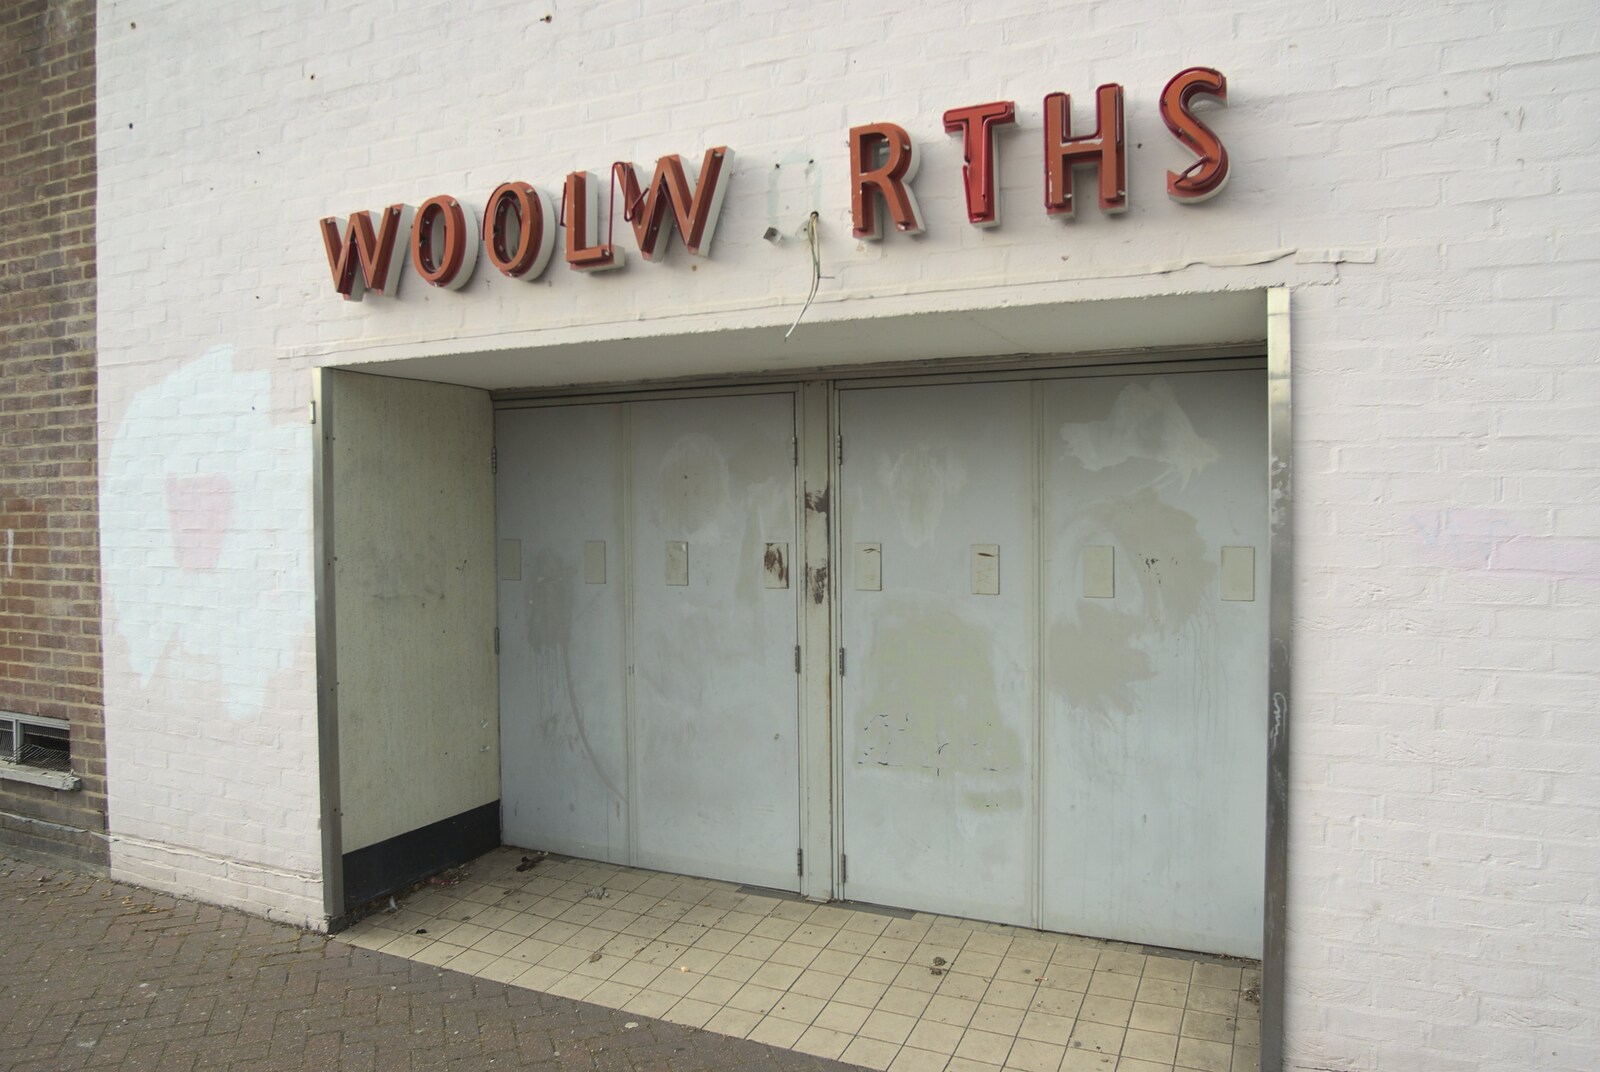 The back entrance to the old Woolworths from A Trip to Norwich, and Ipswich Dereliction, Norfolk and Suffolk - 24th April 2010